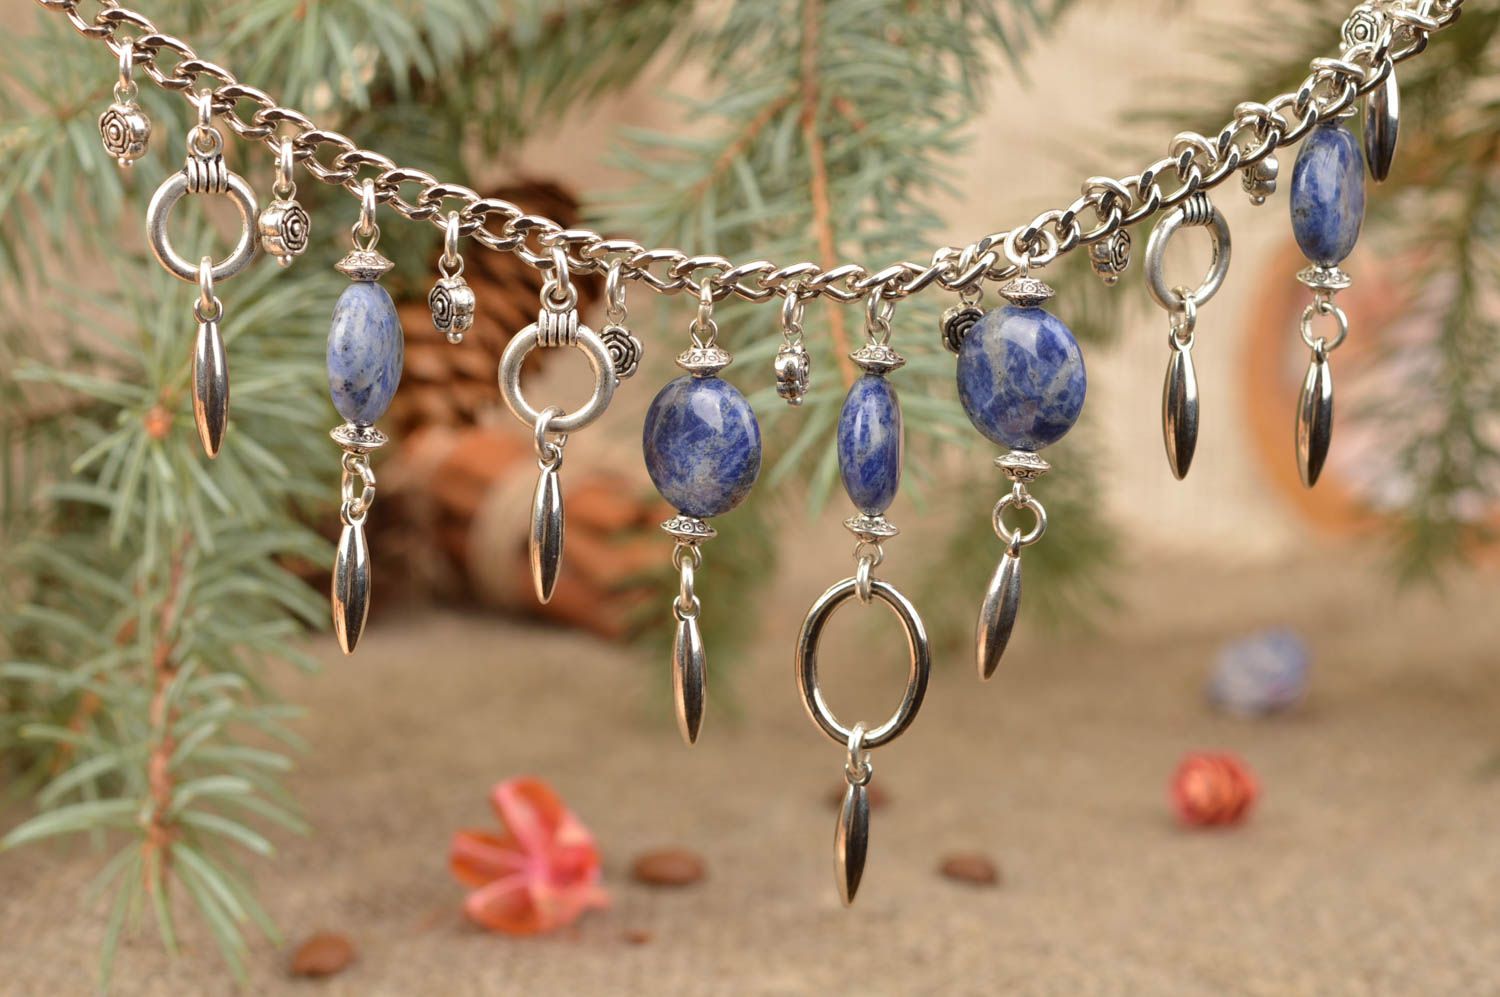 Set of handmade metal jewelry with blue beads necklace and earrings Sky photo 1